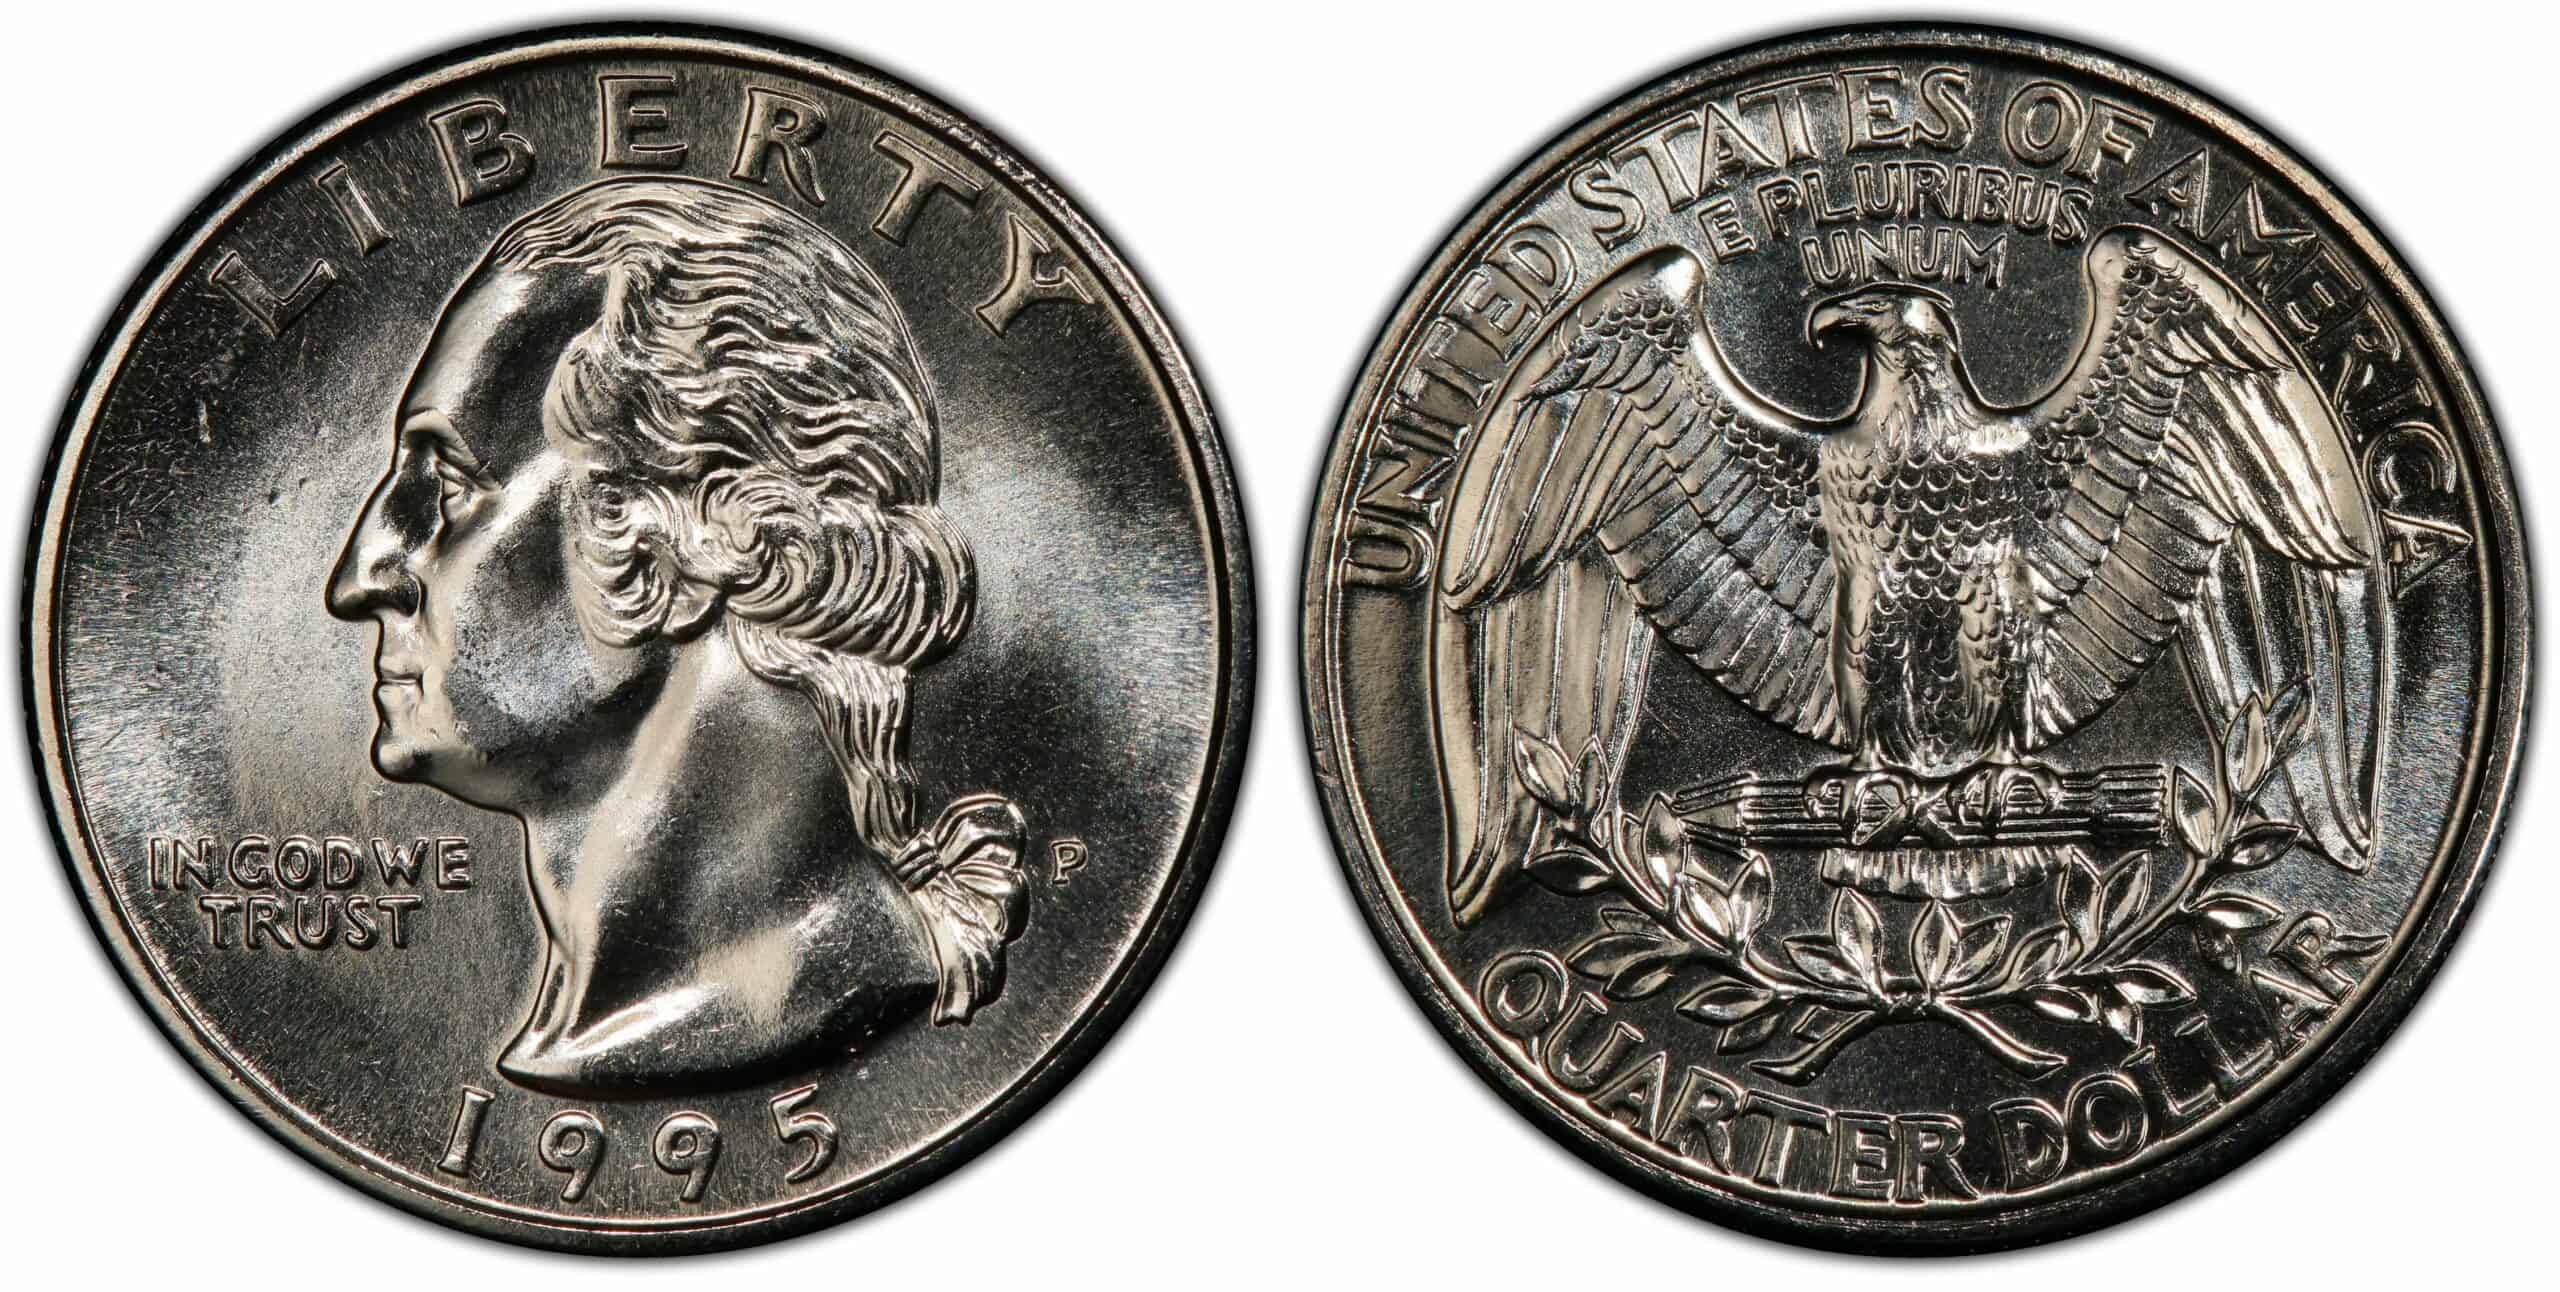 History of the 1995 Quarter